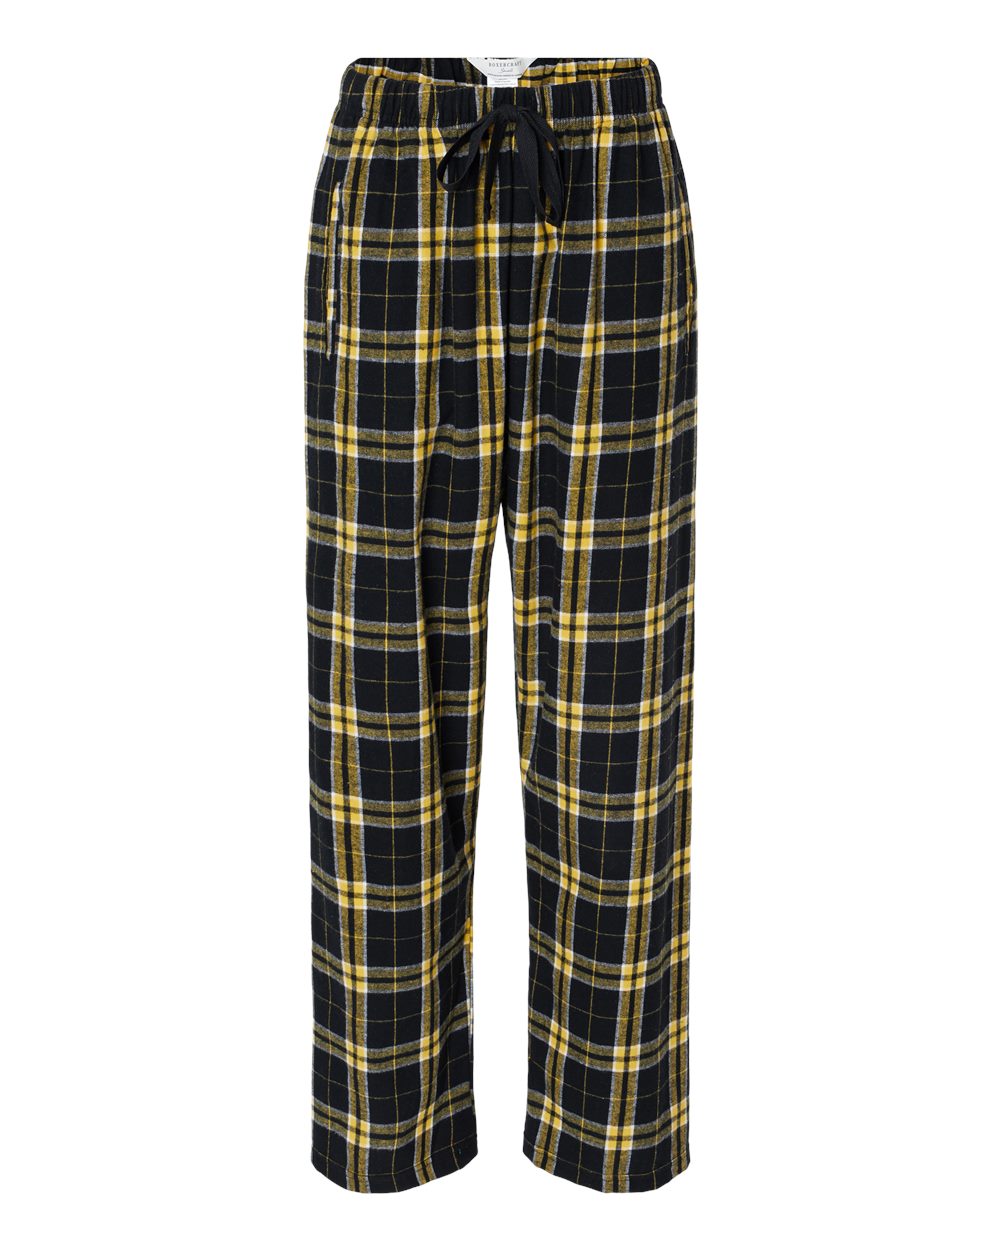 Boxercraft Ladies Haley Flannel Pants Black and Gold Color Pants with Custom Text